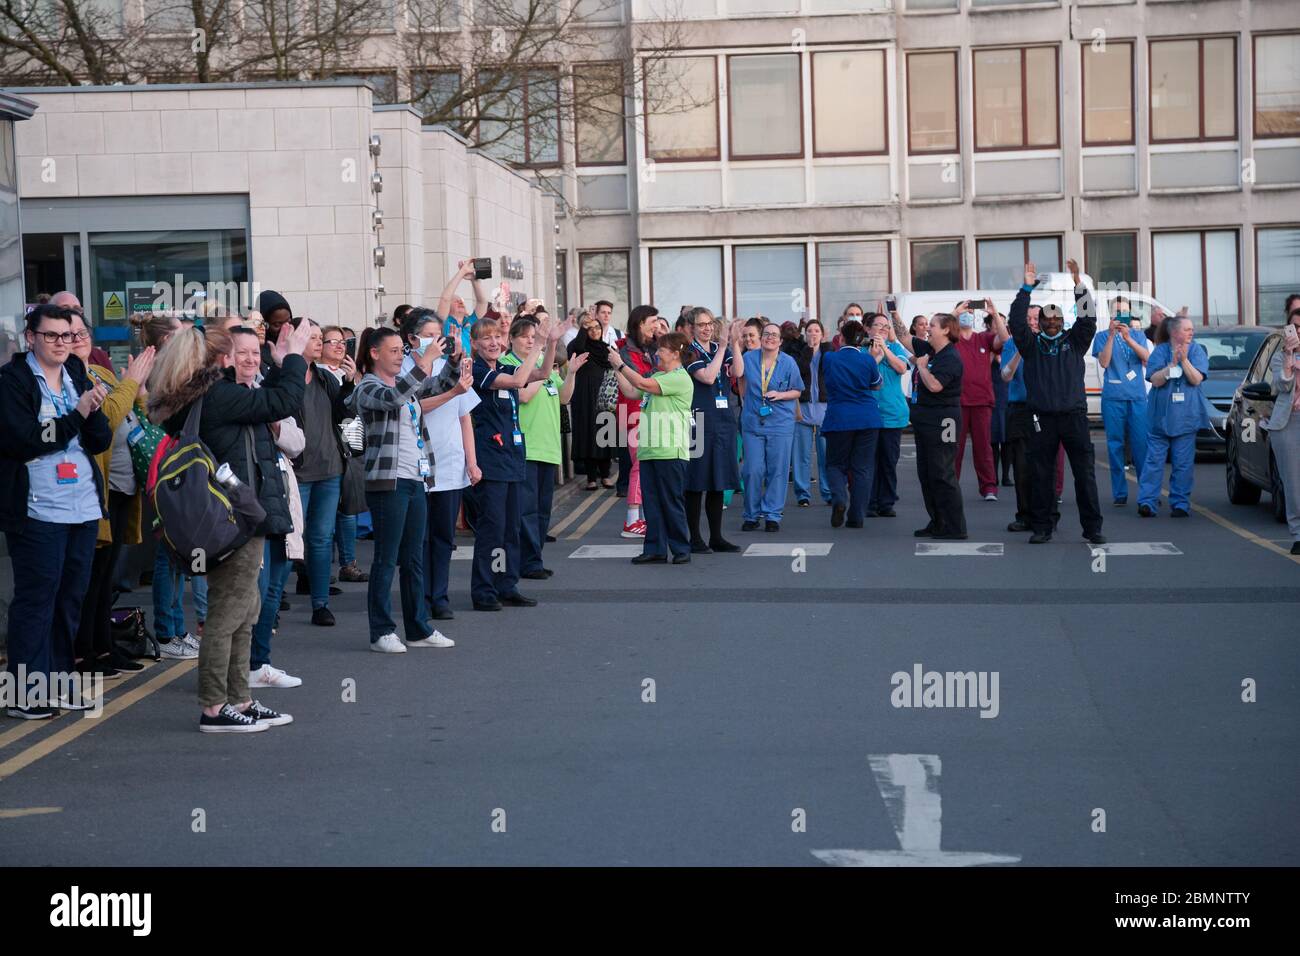 NHS workers gather in front of Huddersfield Royal Infirmary for ‘clap for our carers’. Stock Photo